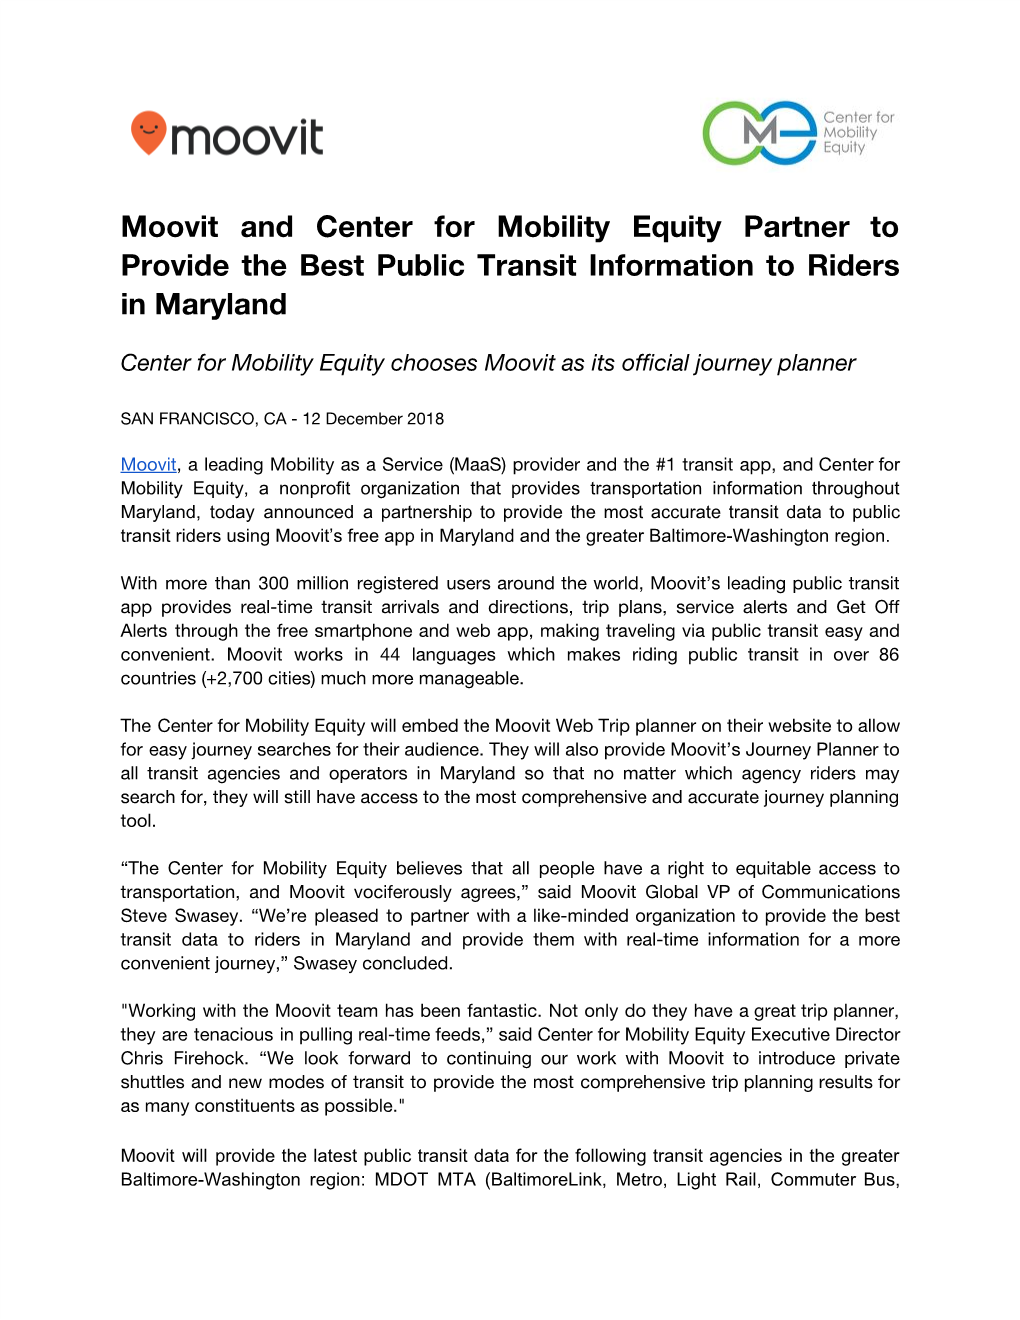 Moovit and Center for Mobility Equity Partner to Provide the Best Public Transit Information to Riders in Maryland